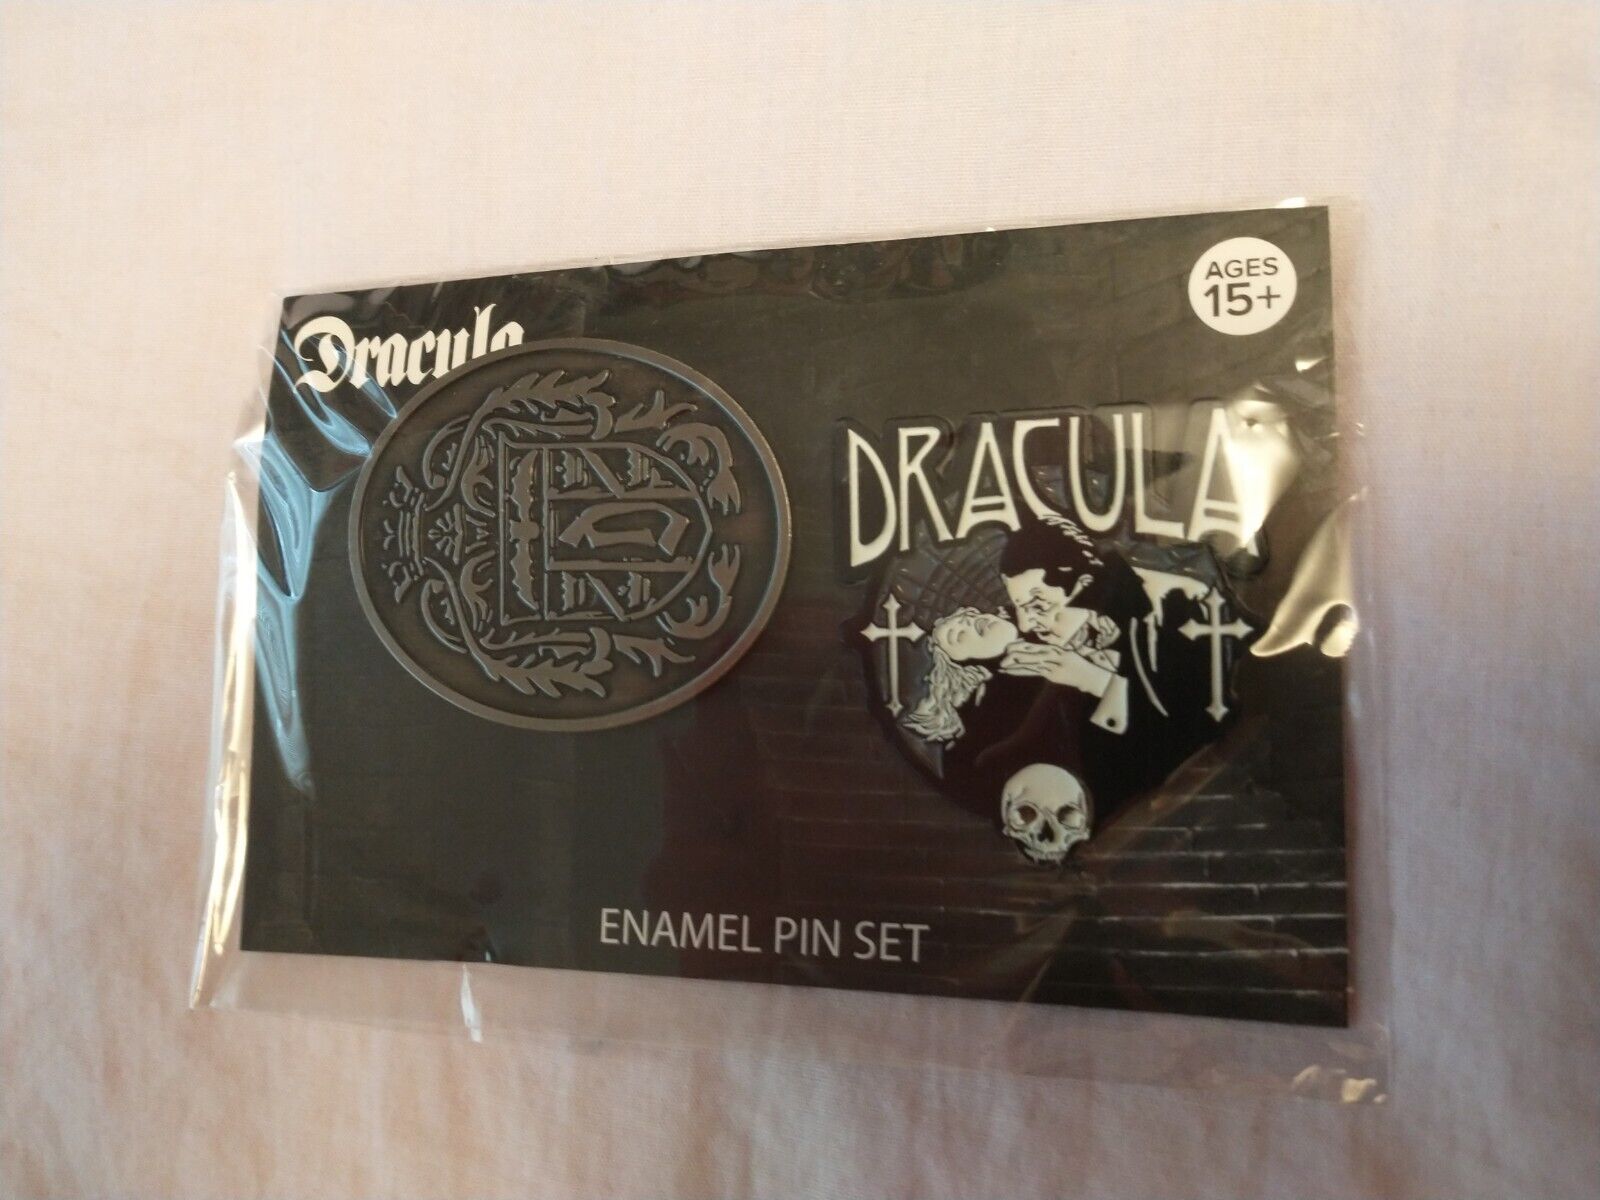 Universal Monsters NECA Dracula DELUXE Enamel Pin Loot Fright Crate Exclusive